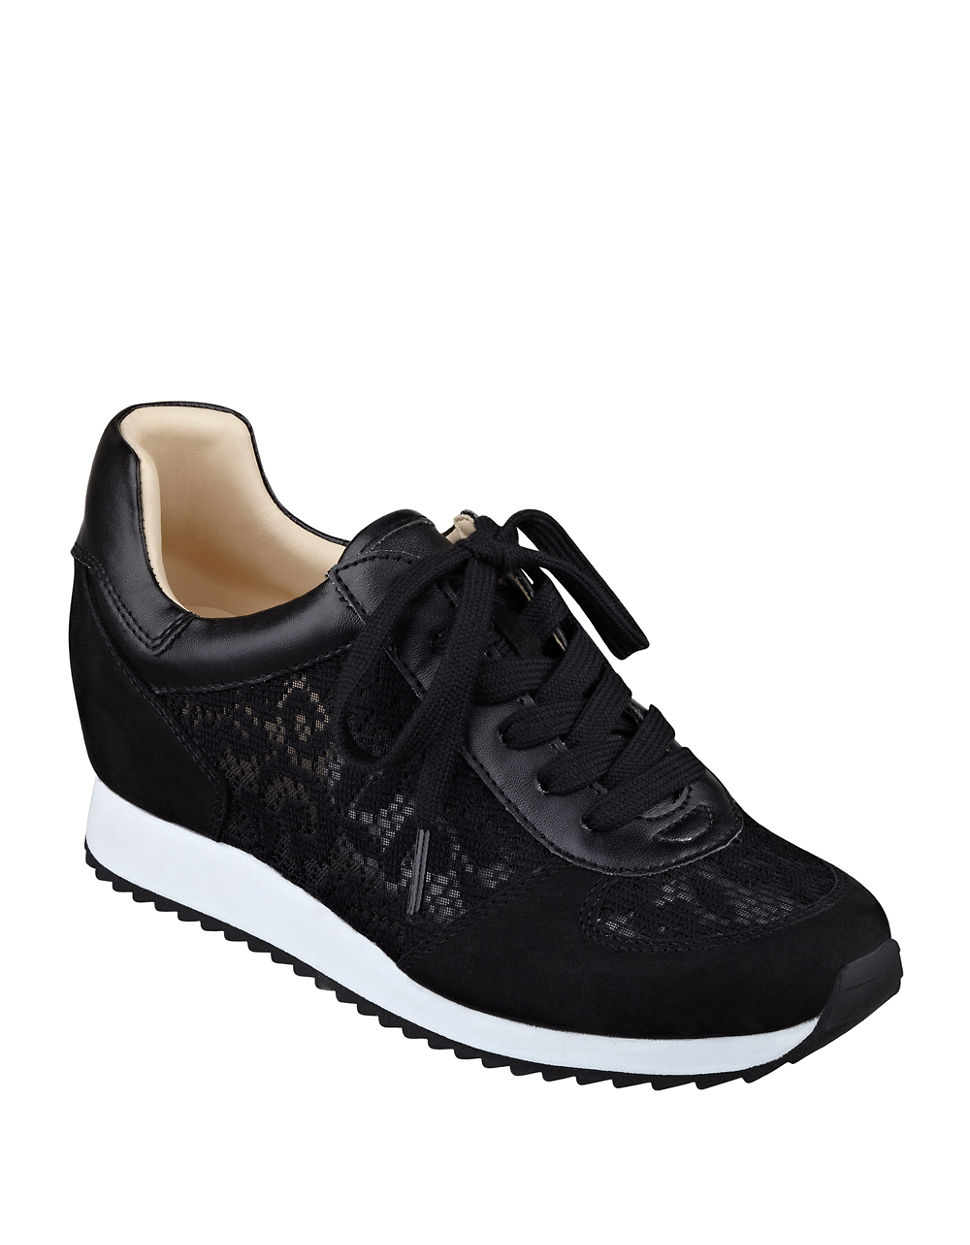 Nine West Telly Lace-Up Sneakers in Black